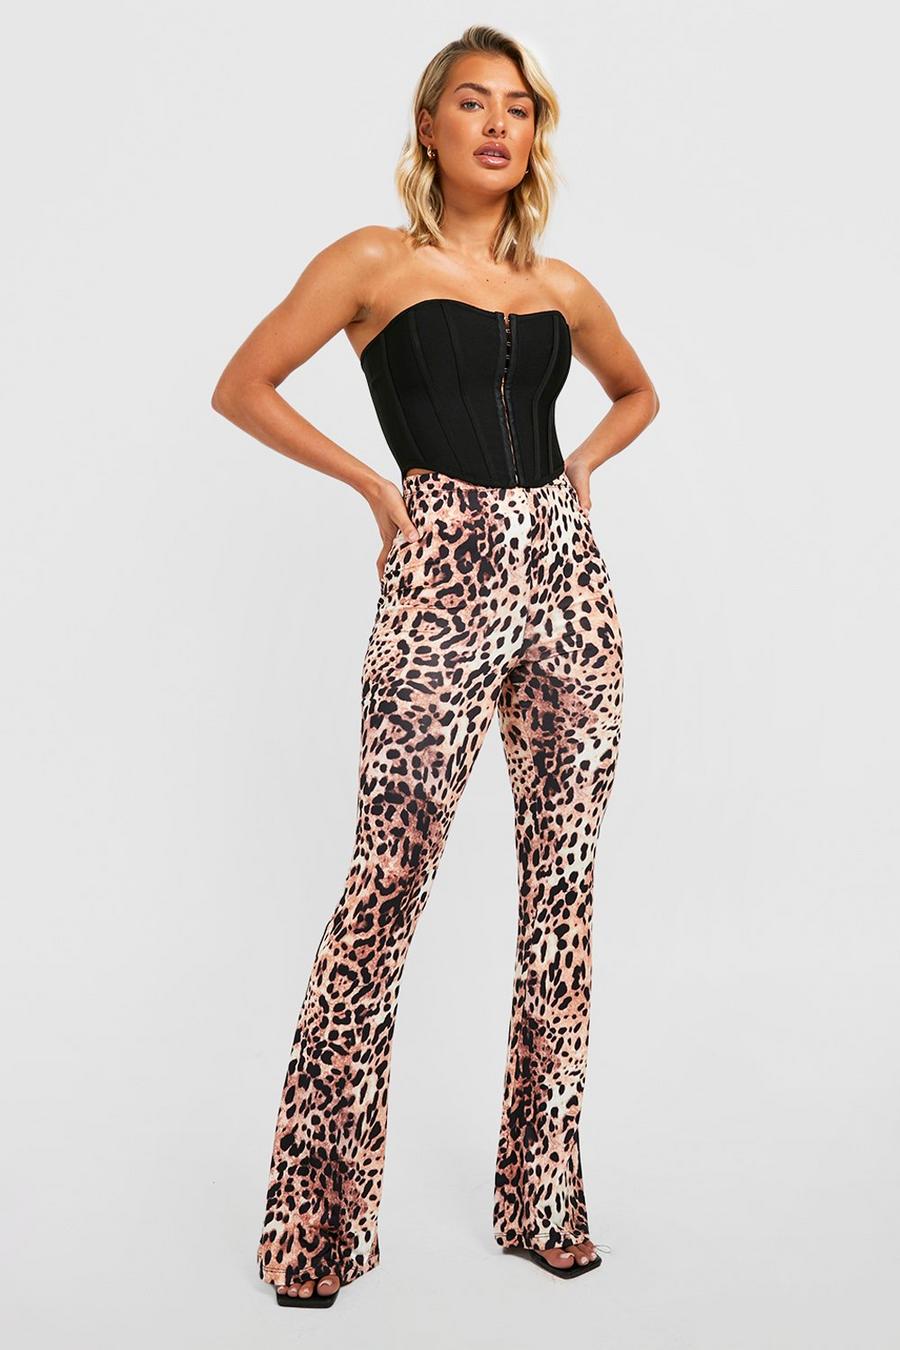 Tan brown Leopard Print Recycled Slinky Flared Pants